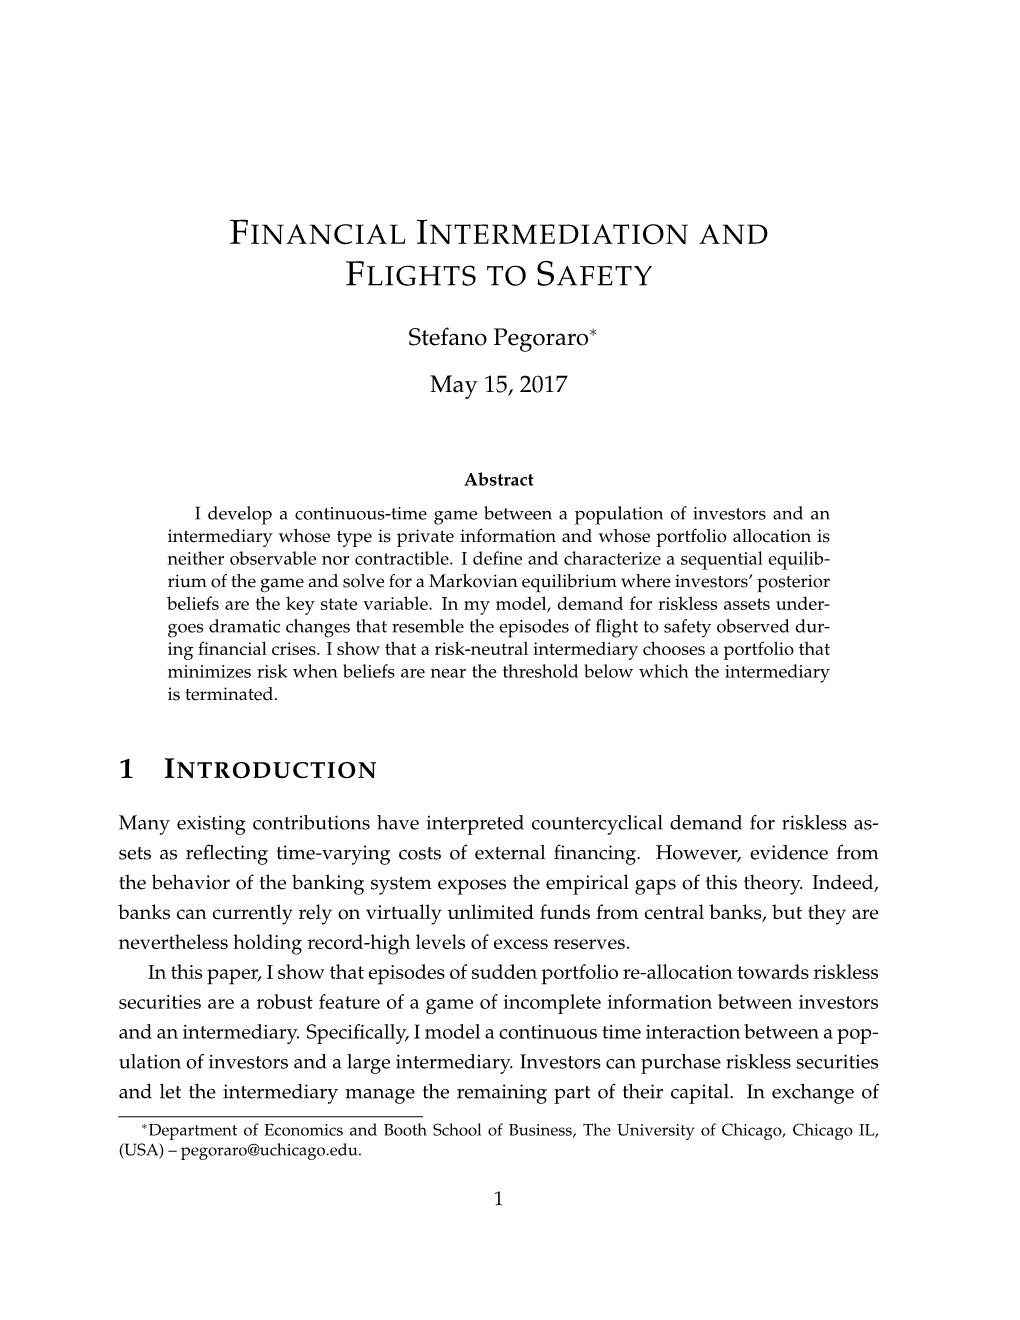 Financial Intermediation and Flights to Safety